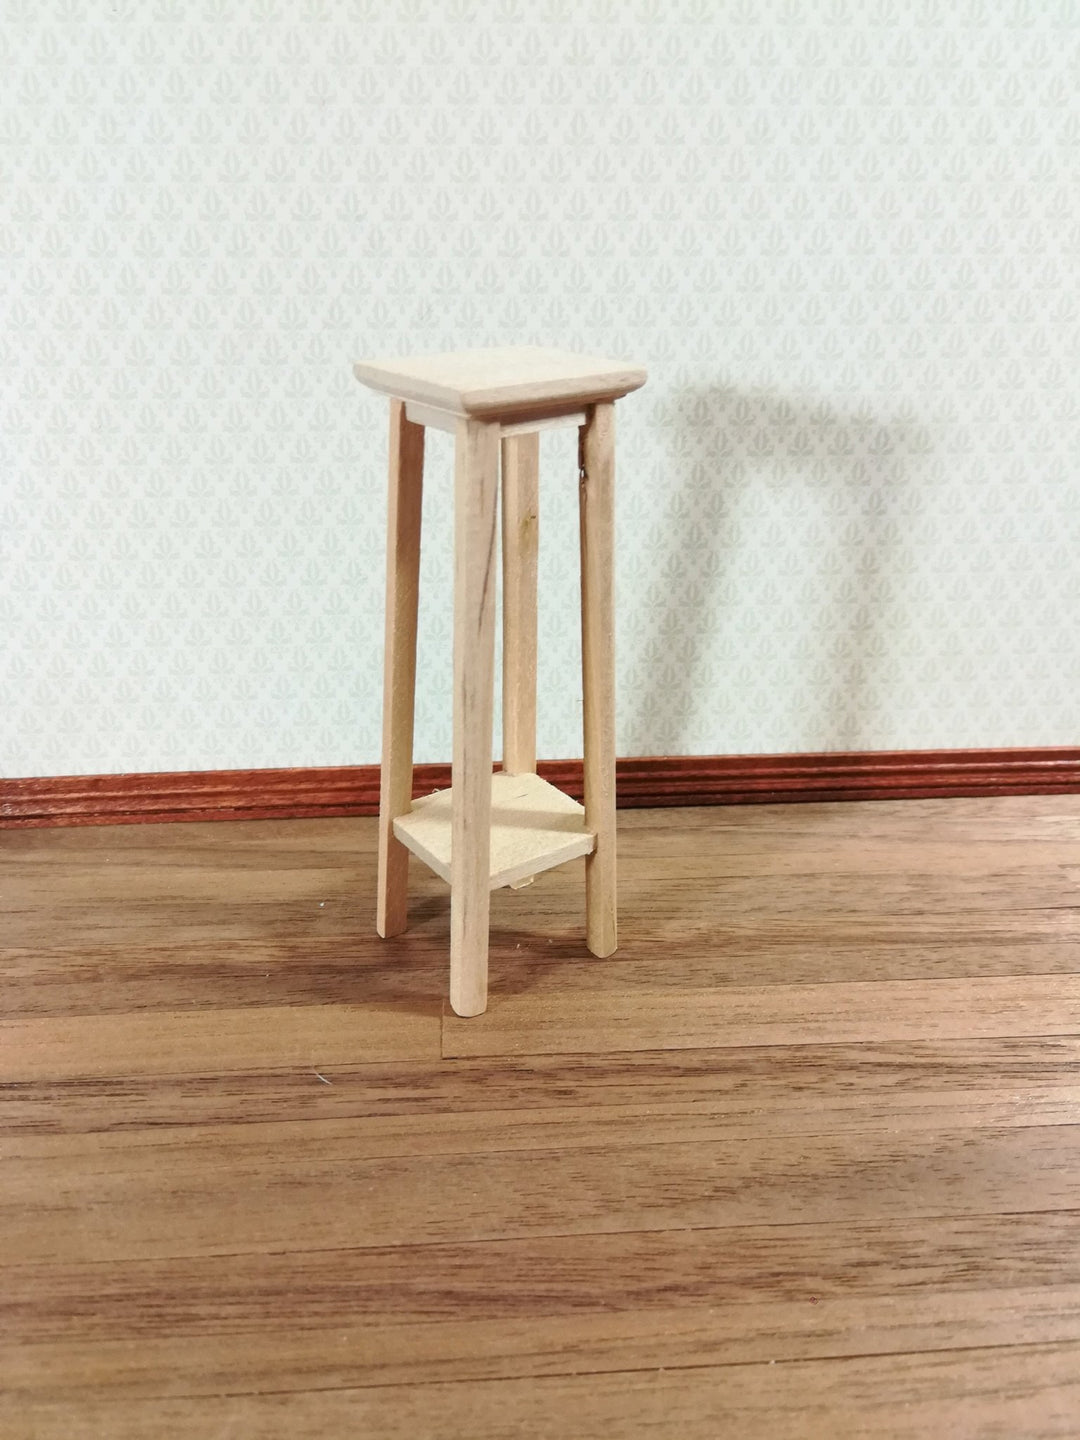 Dollhouse Miniature Tall Fern or Plant Stand Unfinished 1:12 Scale Furniture - Miniature Crush